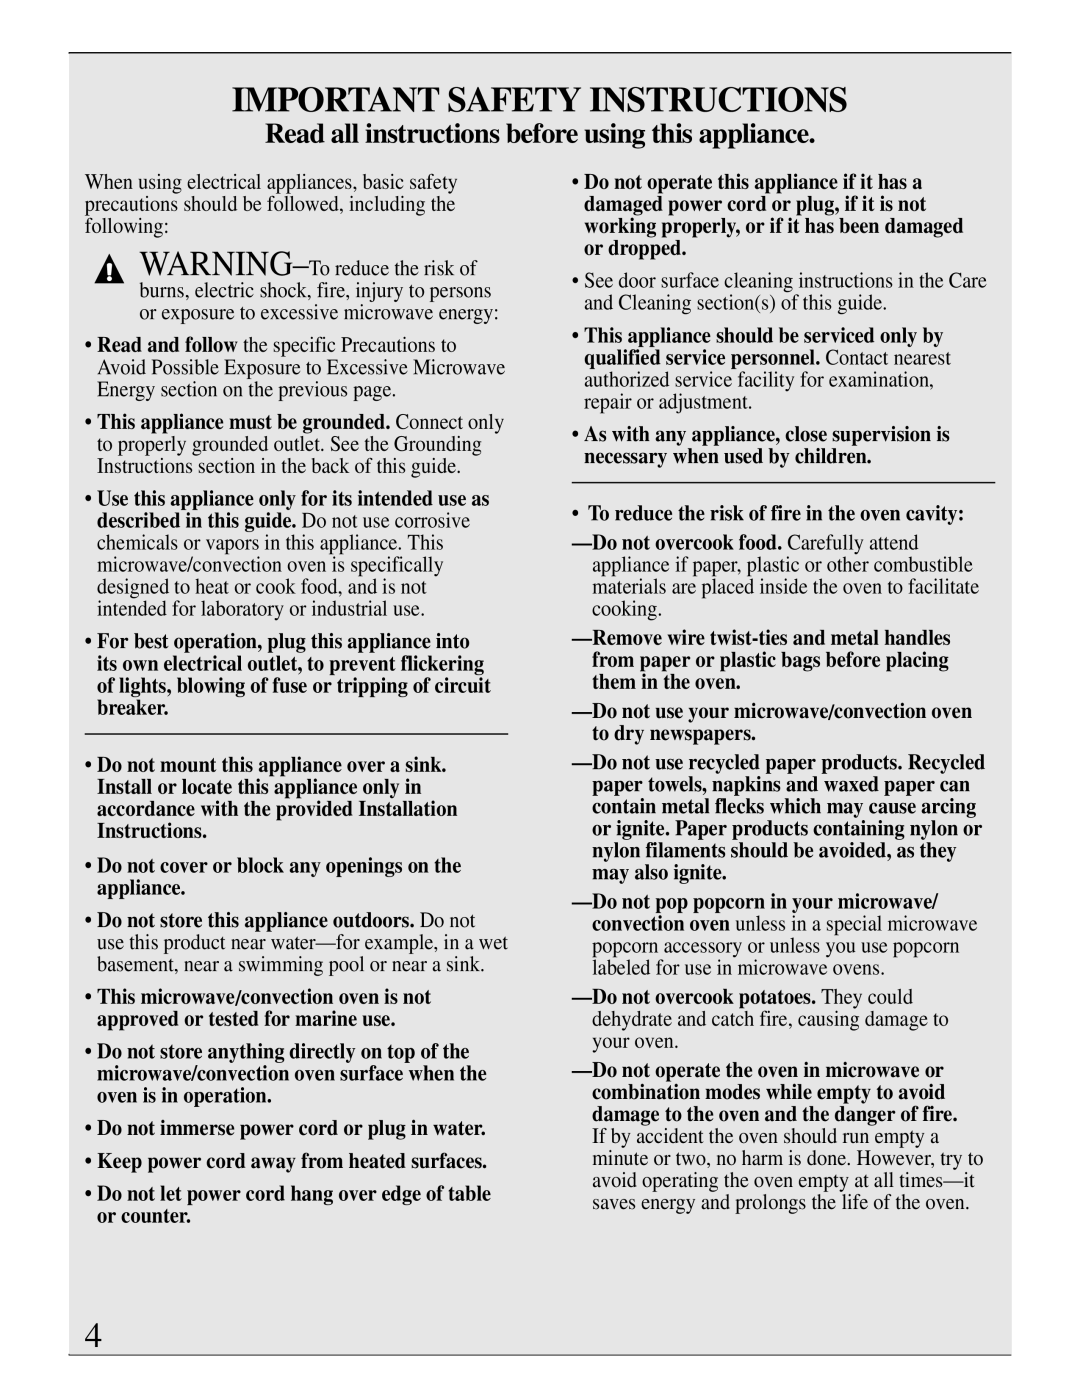 GE Monogram ZMC1090 Series manual Important Safety Instructions, Read all instructions before using this appliance 